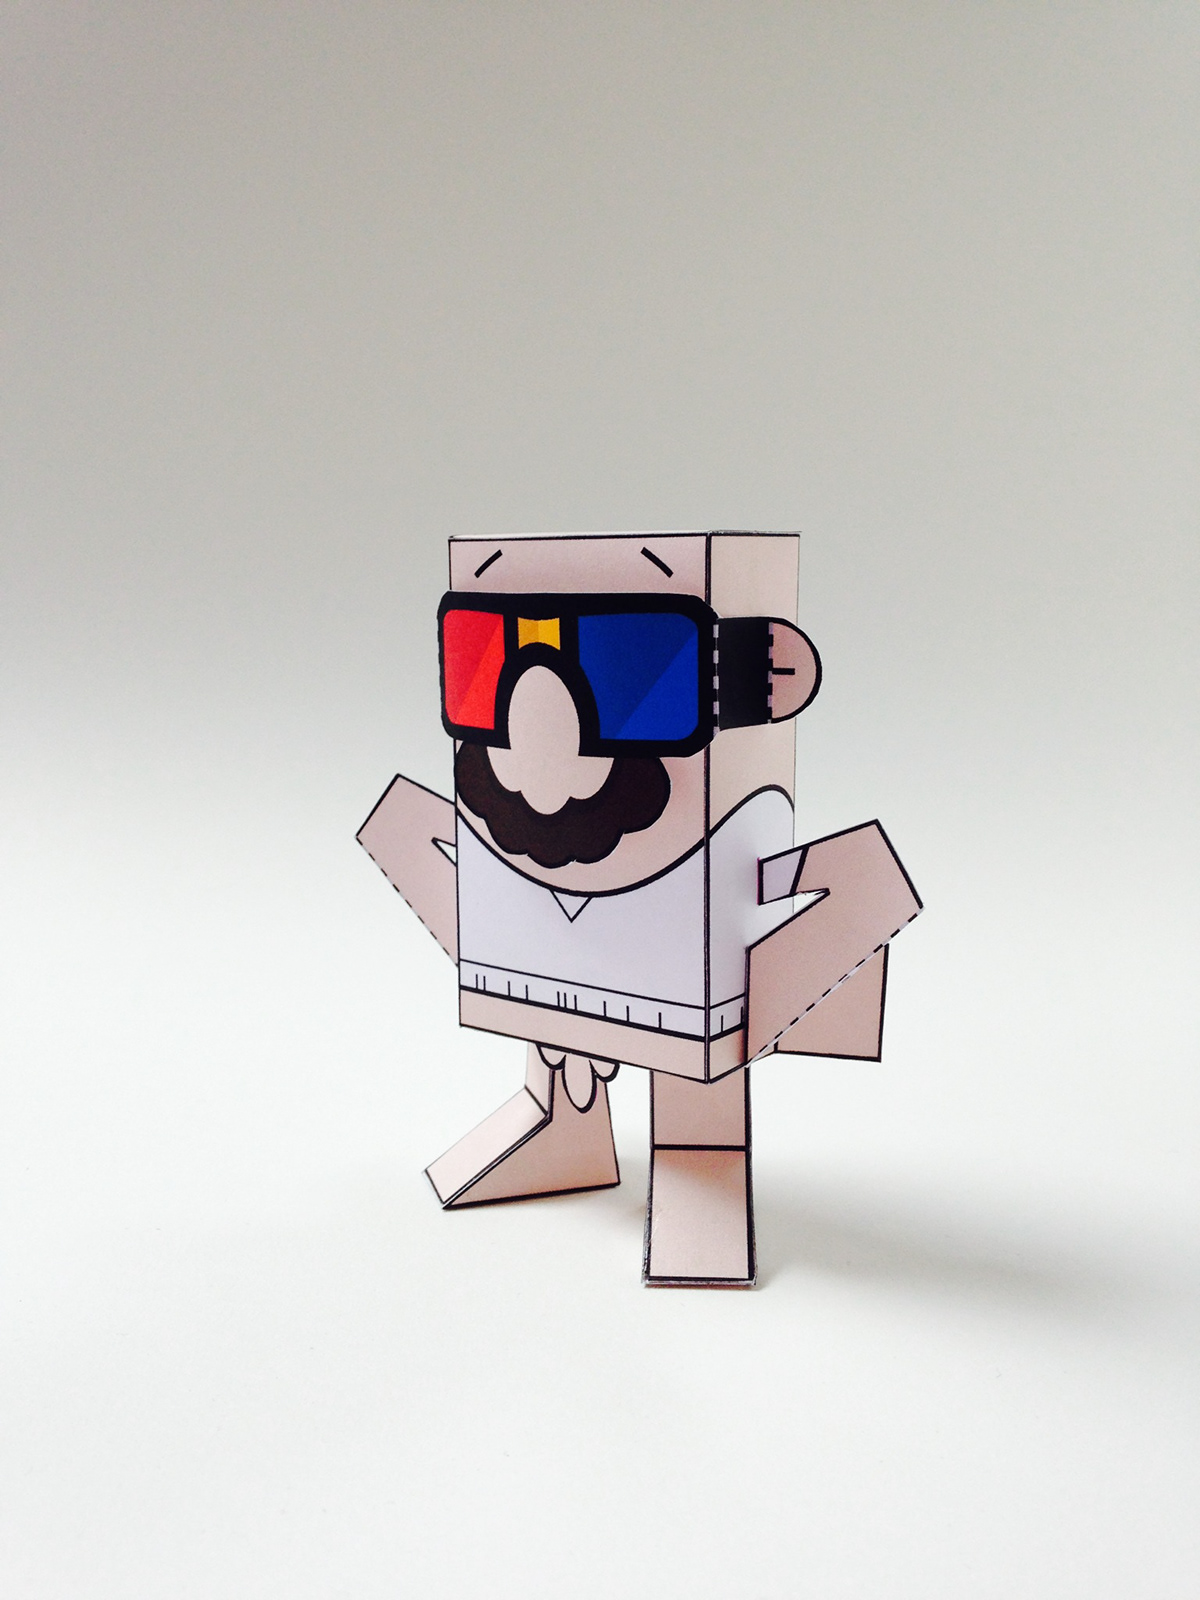 philtoys Character design toy paper sanfrancisco Show Illustrator passion filippo glasses mustache naked niceguy papertoy